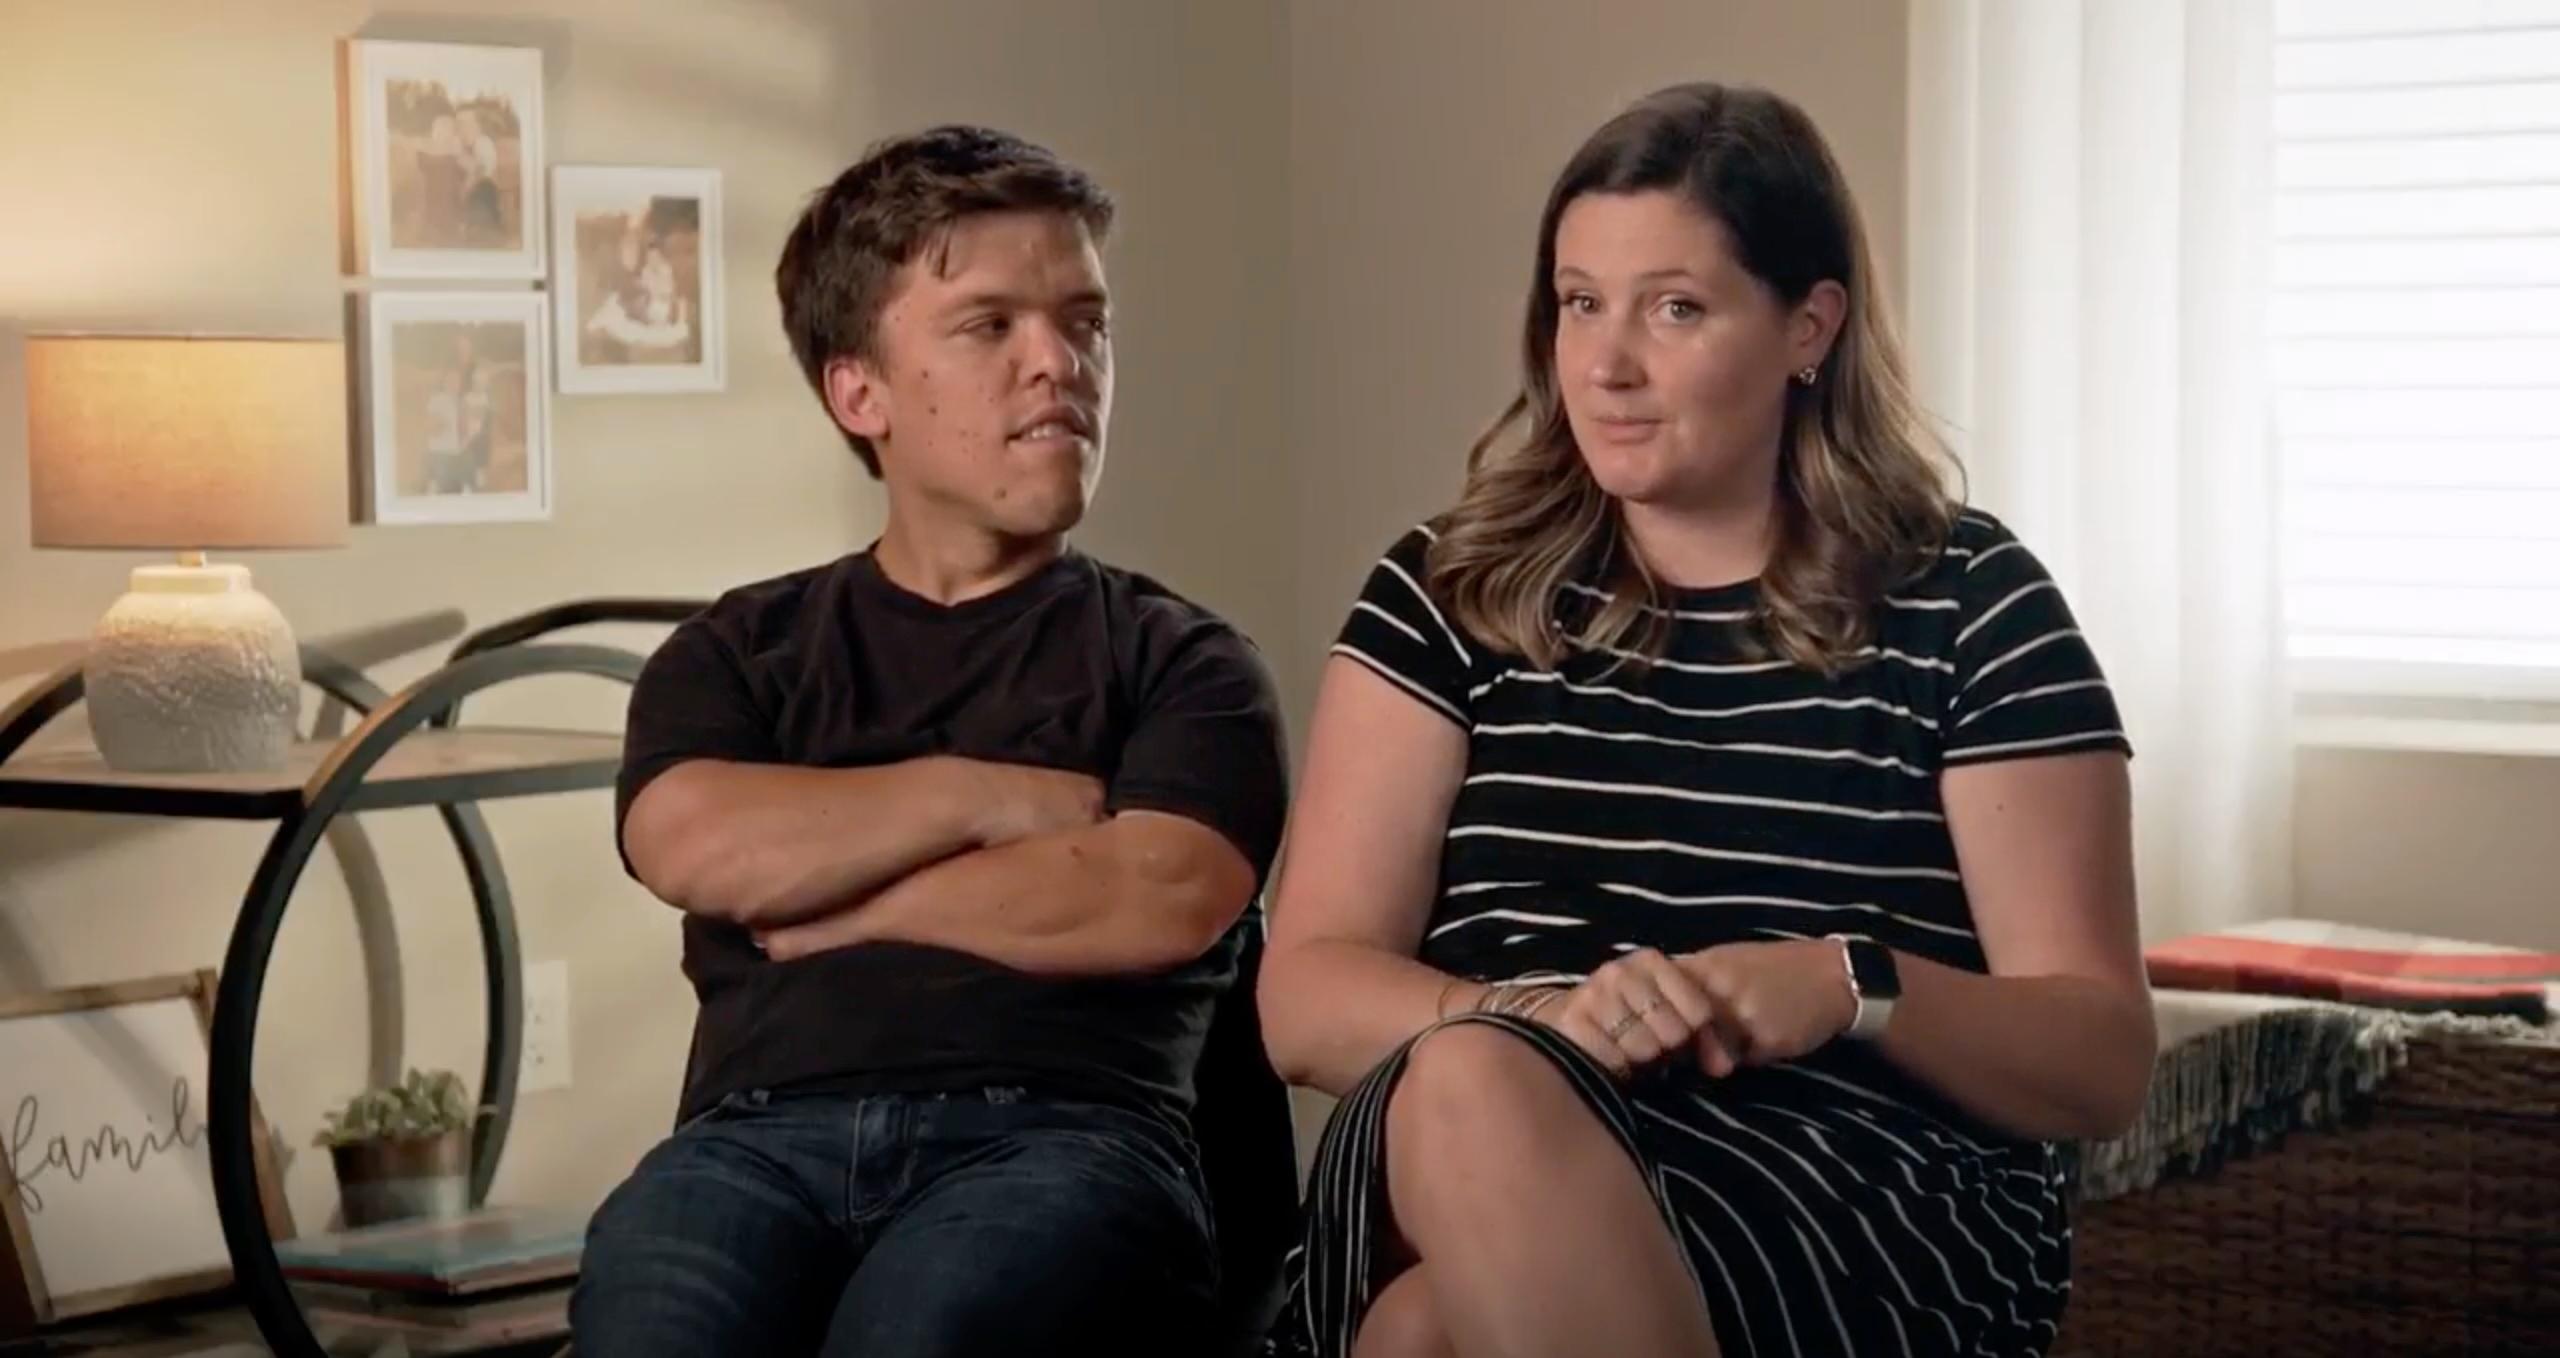 Zach and Tori Roloff in a confessional on TLC's Little People, Big World